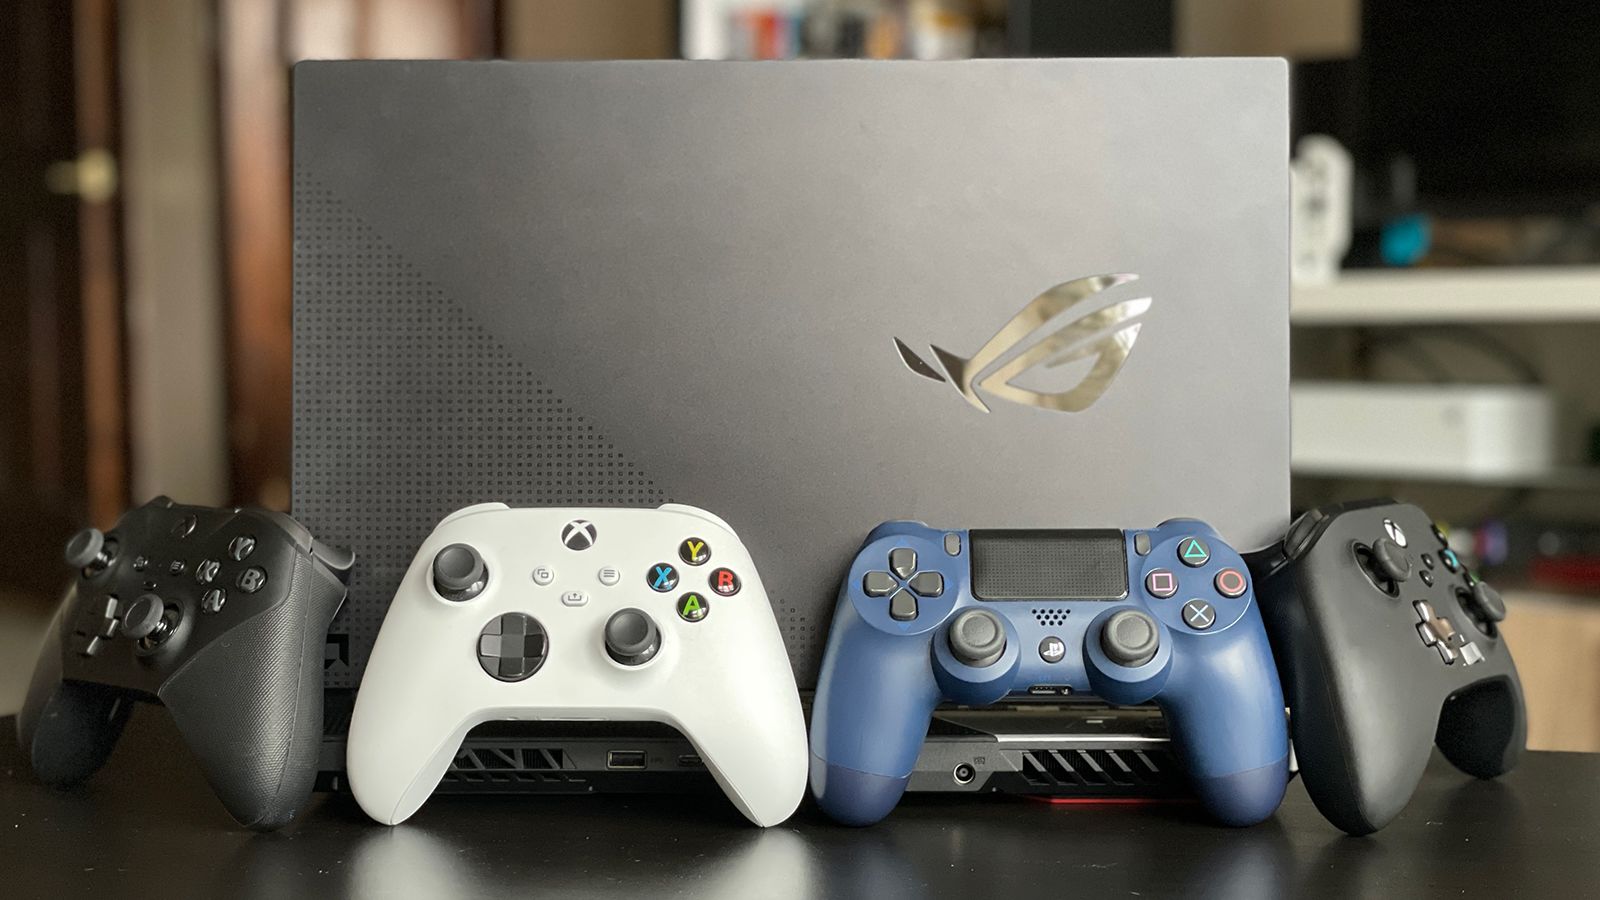 Here's  LUNA 🎮 The 's Gaming platform that doesn't need any  console or powerful PC 